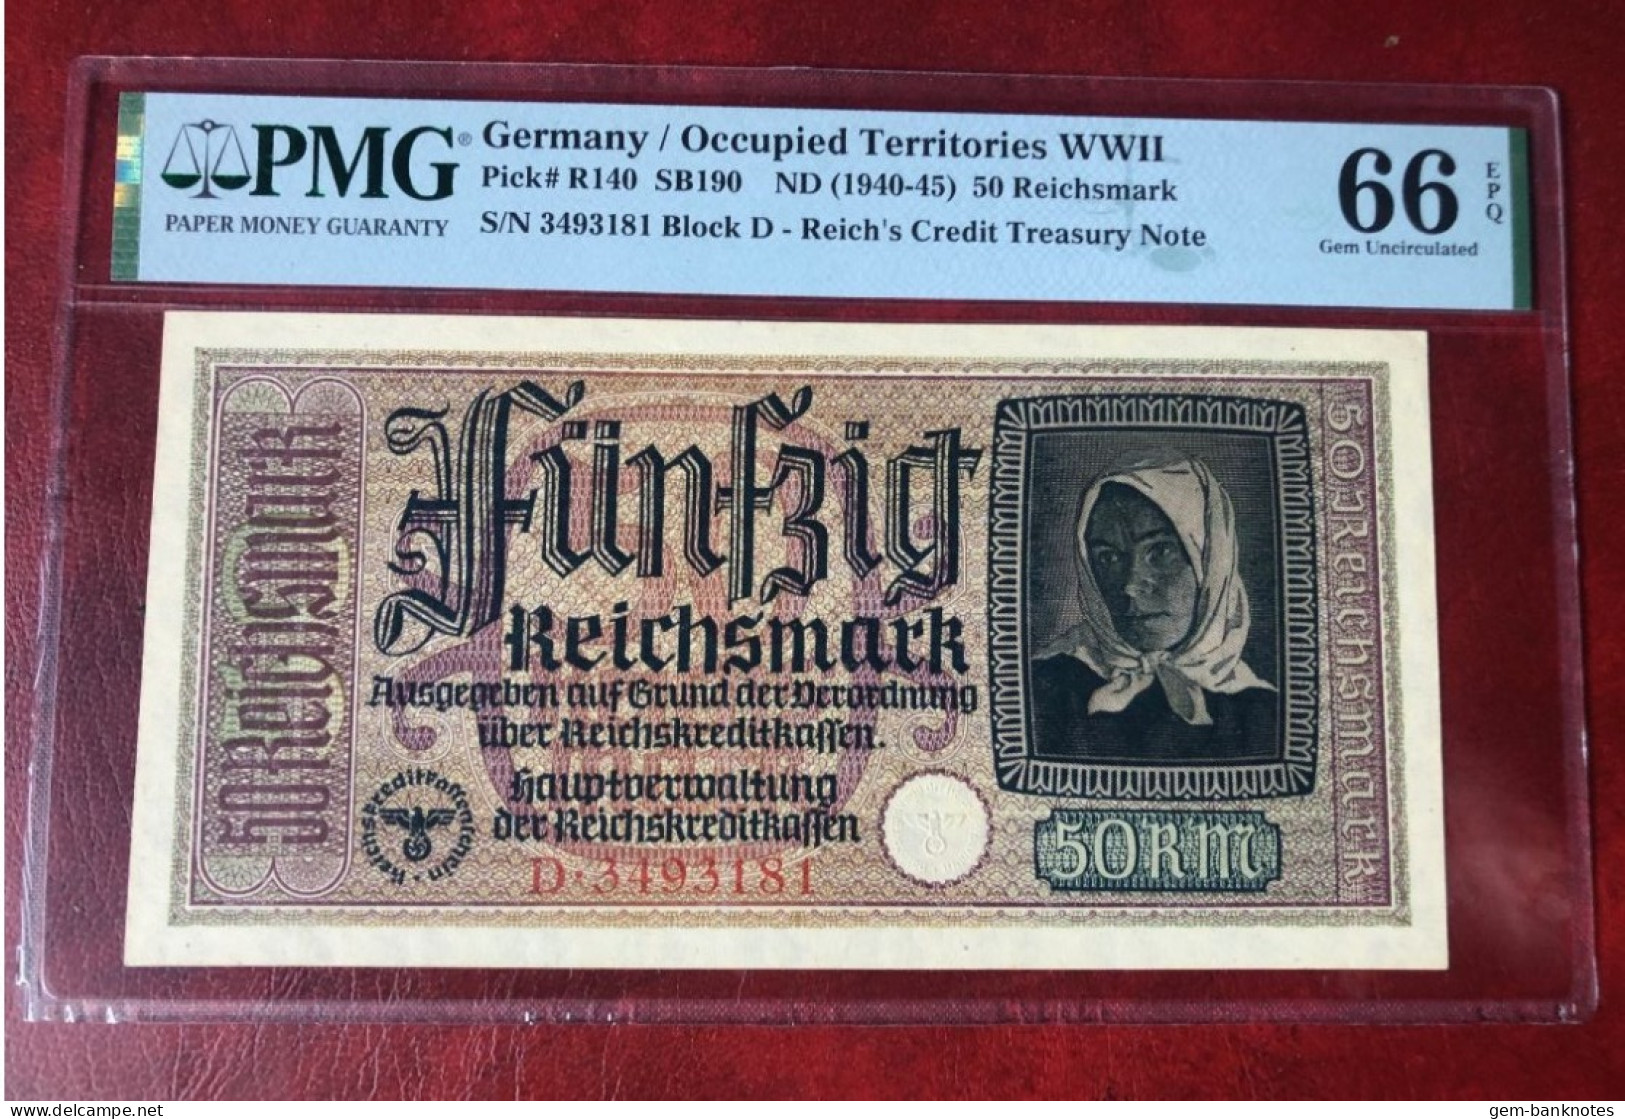 Germany/Occupied Territories 50 Reichsmark 1940-45 P-R140 Graded 66 EPQ Gem Uncirculated By PMG - 50 Reichsmark